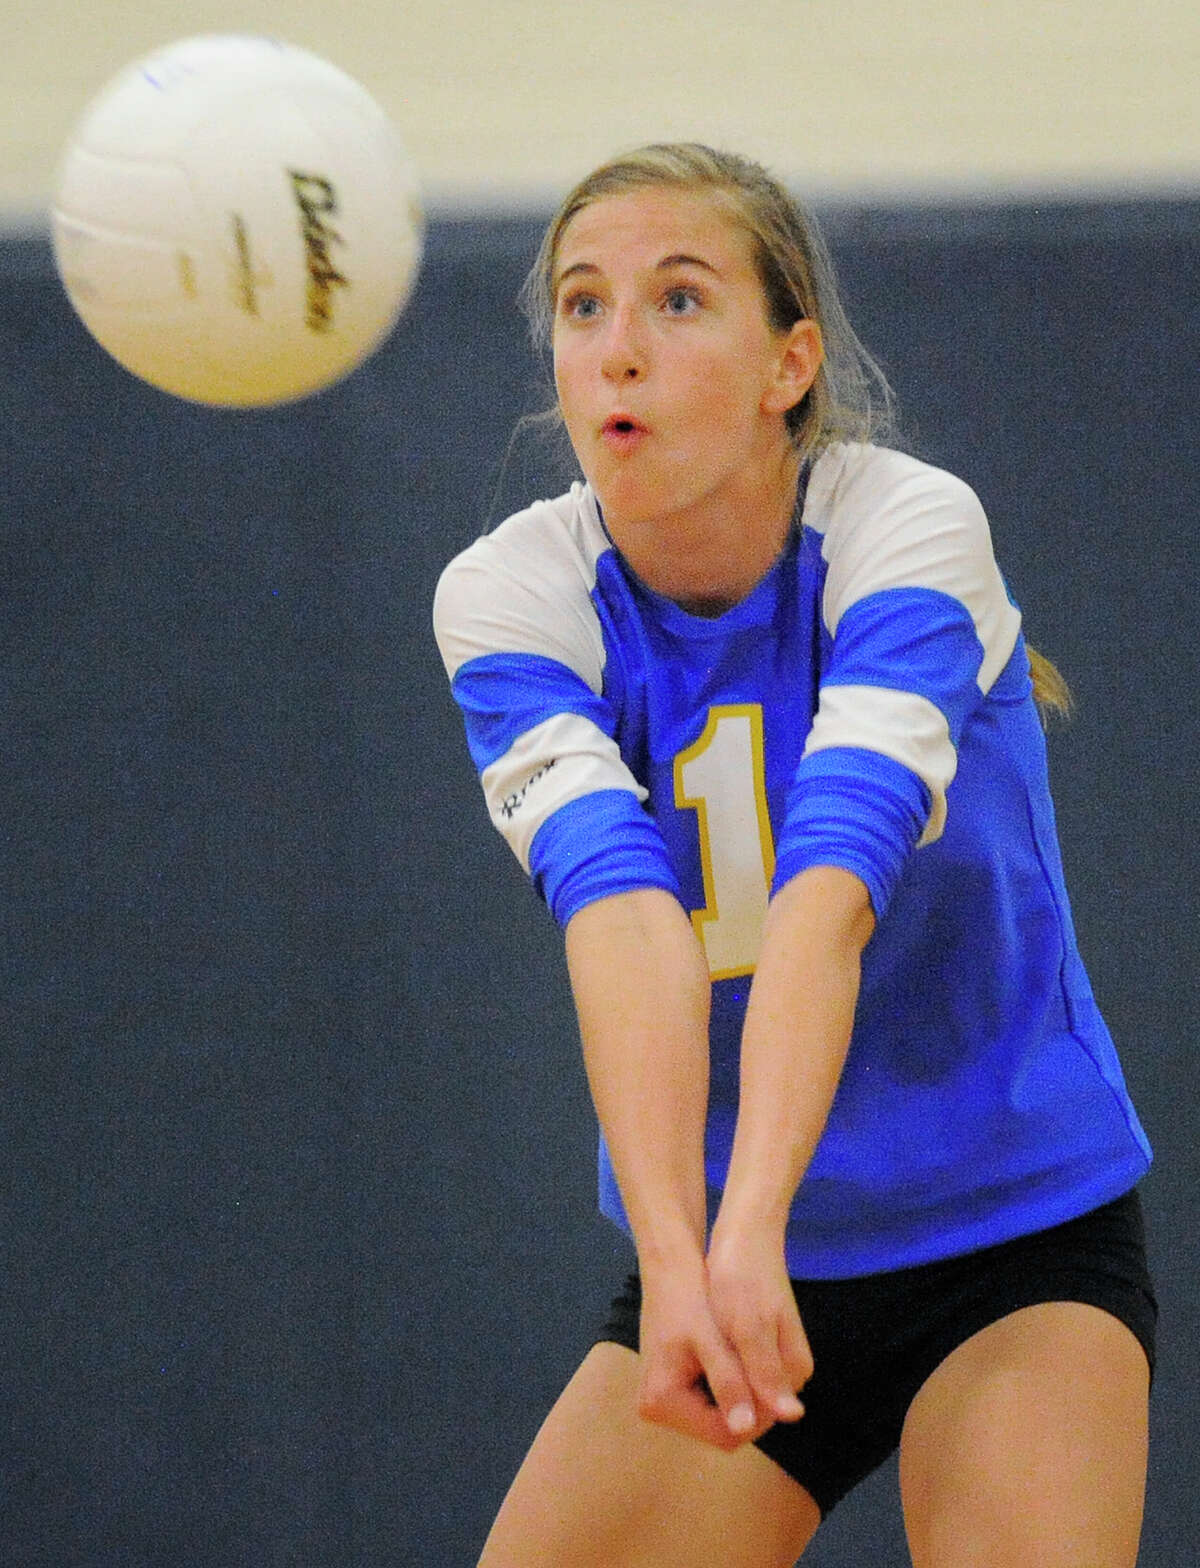 Alamo Heights' Jessica Wellford returns the ball during a high school volleyball game against Antonian, Monday, Aug. 13, 2012, at Alamo Heights High School in San Antonio.